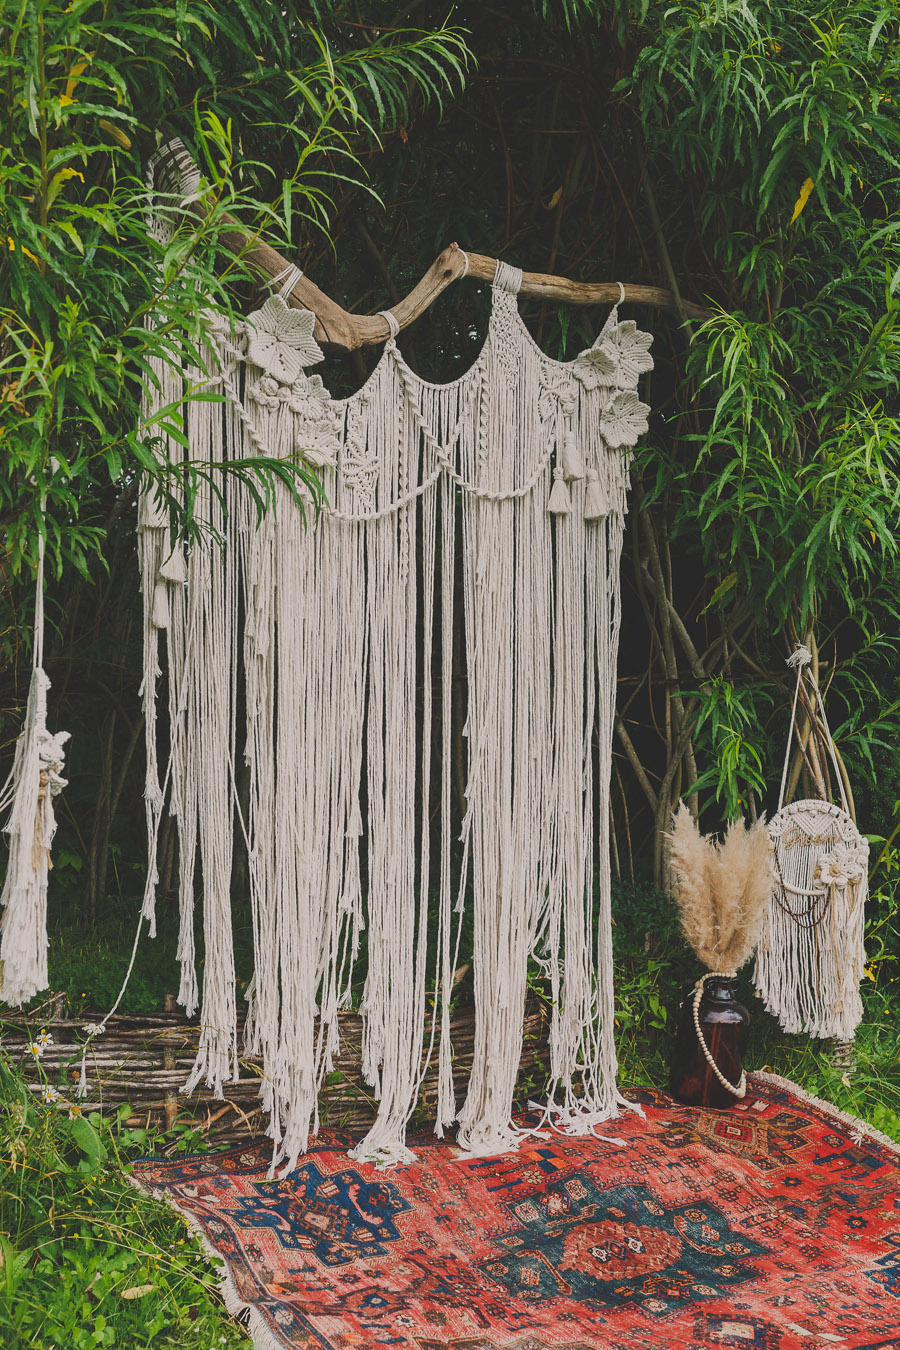 Boho beautiful - wedding inspiration from Chaucer Barn, with Eternal Images Photography Ltd (36)